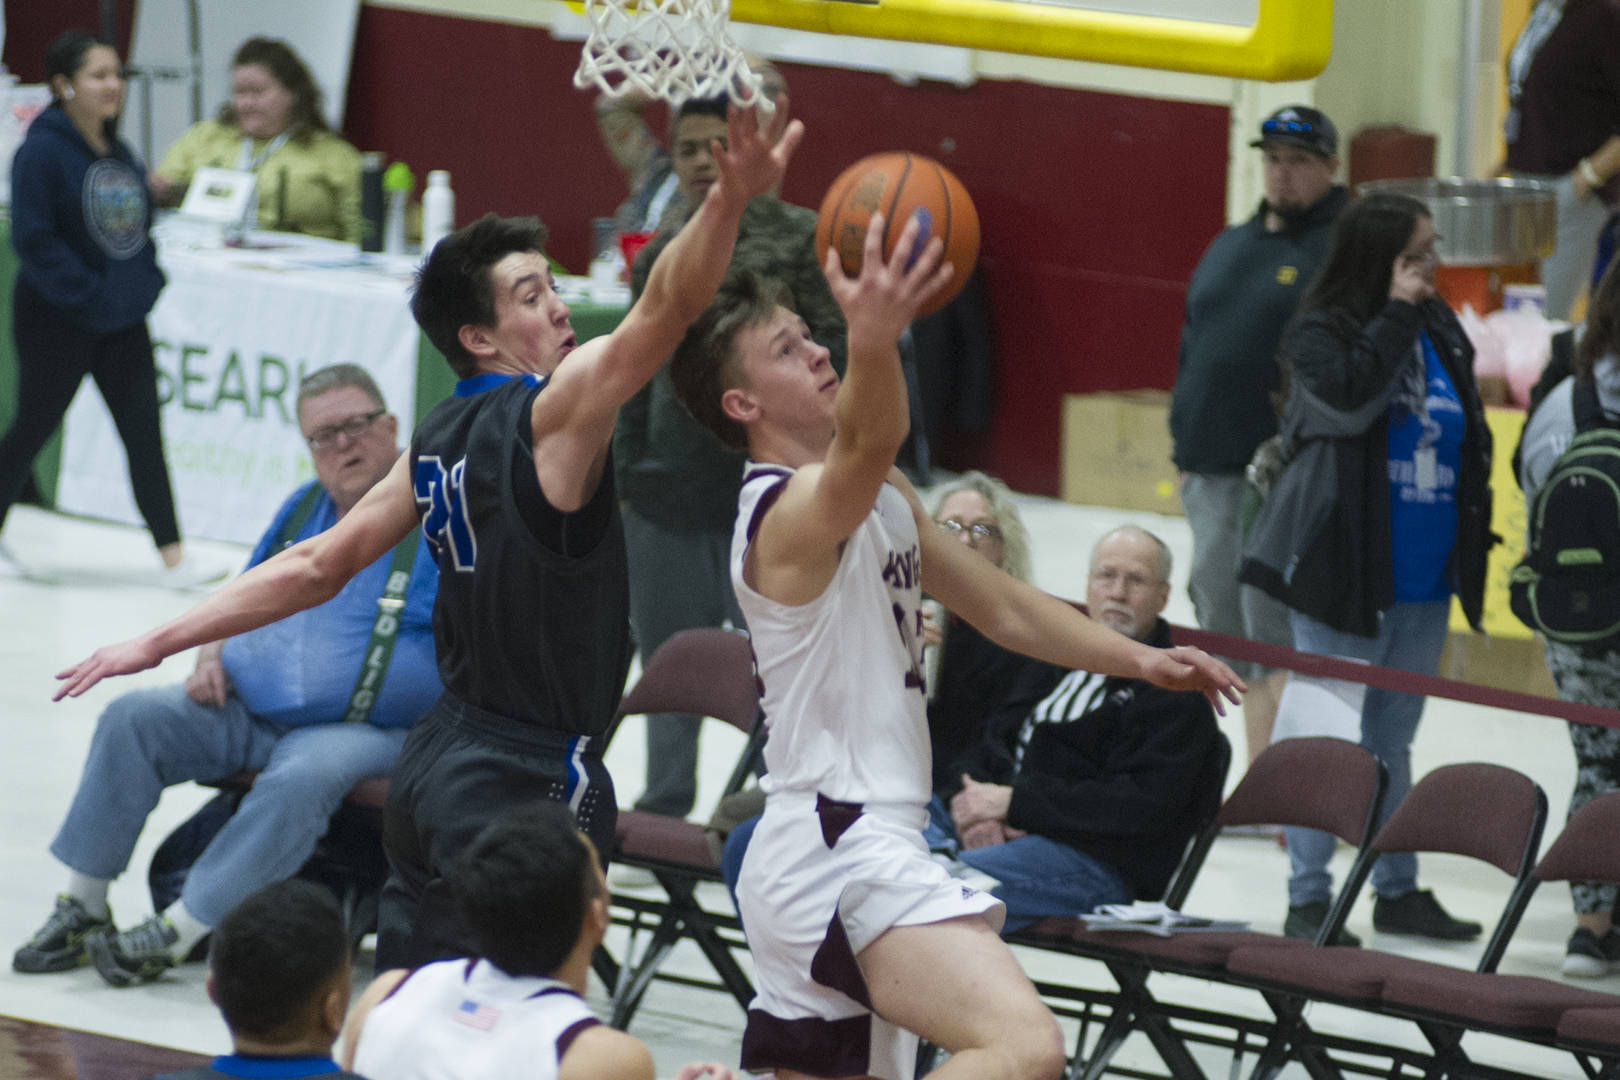 Ketchikan’s Cody Kemble lays the ball up while Thunder Mountain’s Braden Jenkins goes up for the block in the second round of the Region V 4A Tournament at the B.J. McGillis Gymnasium in Sitka. Ketchikan won 55-35. (Nolin Ainsworth | Juneau Empire)